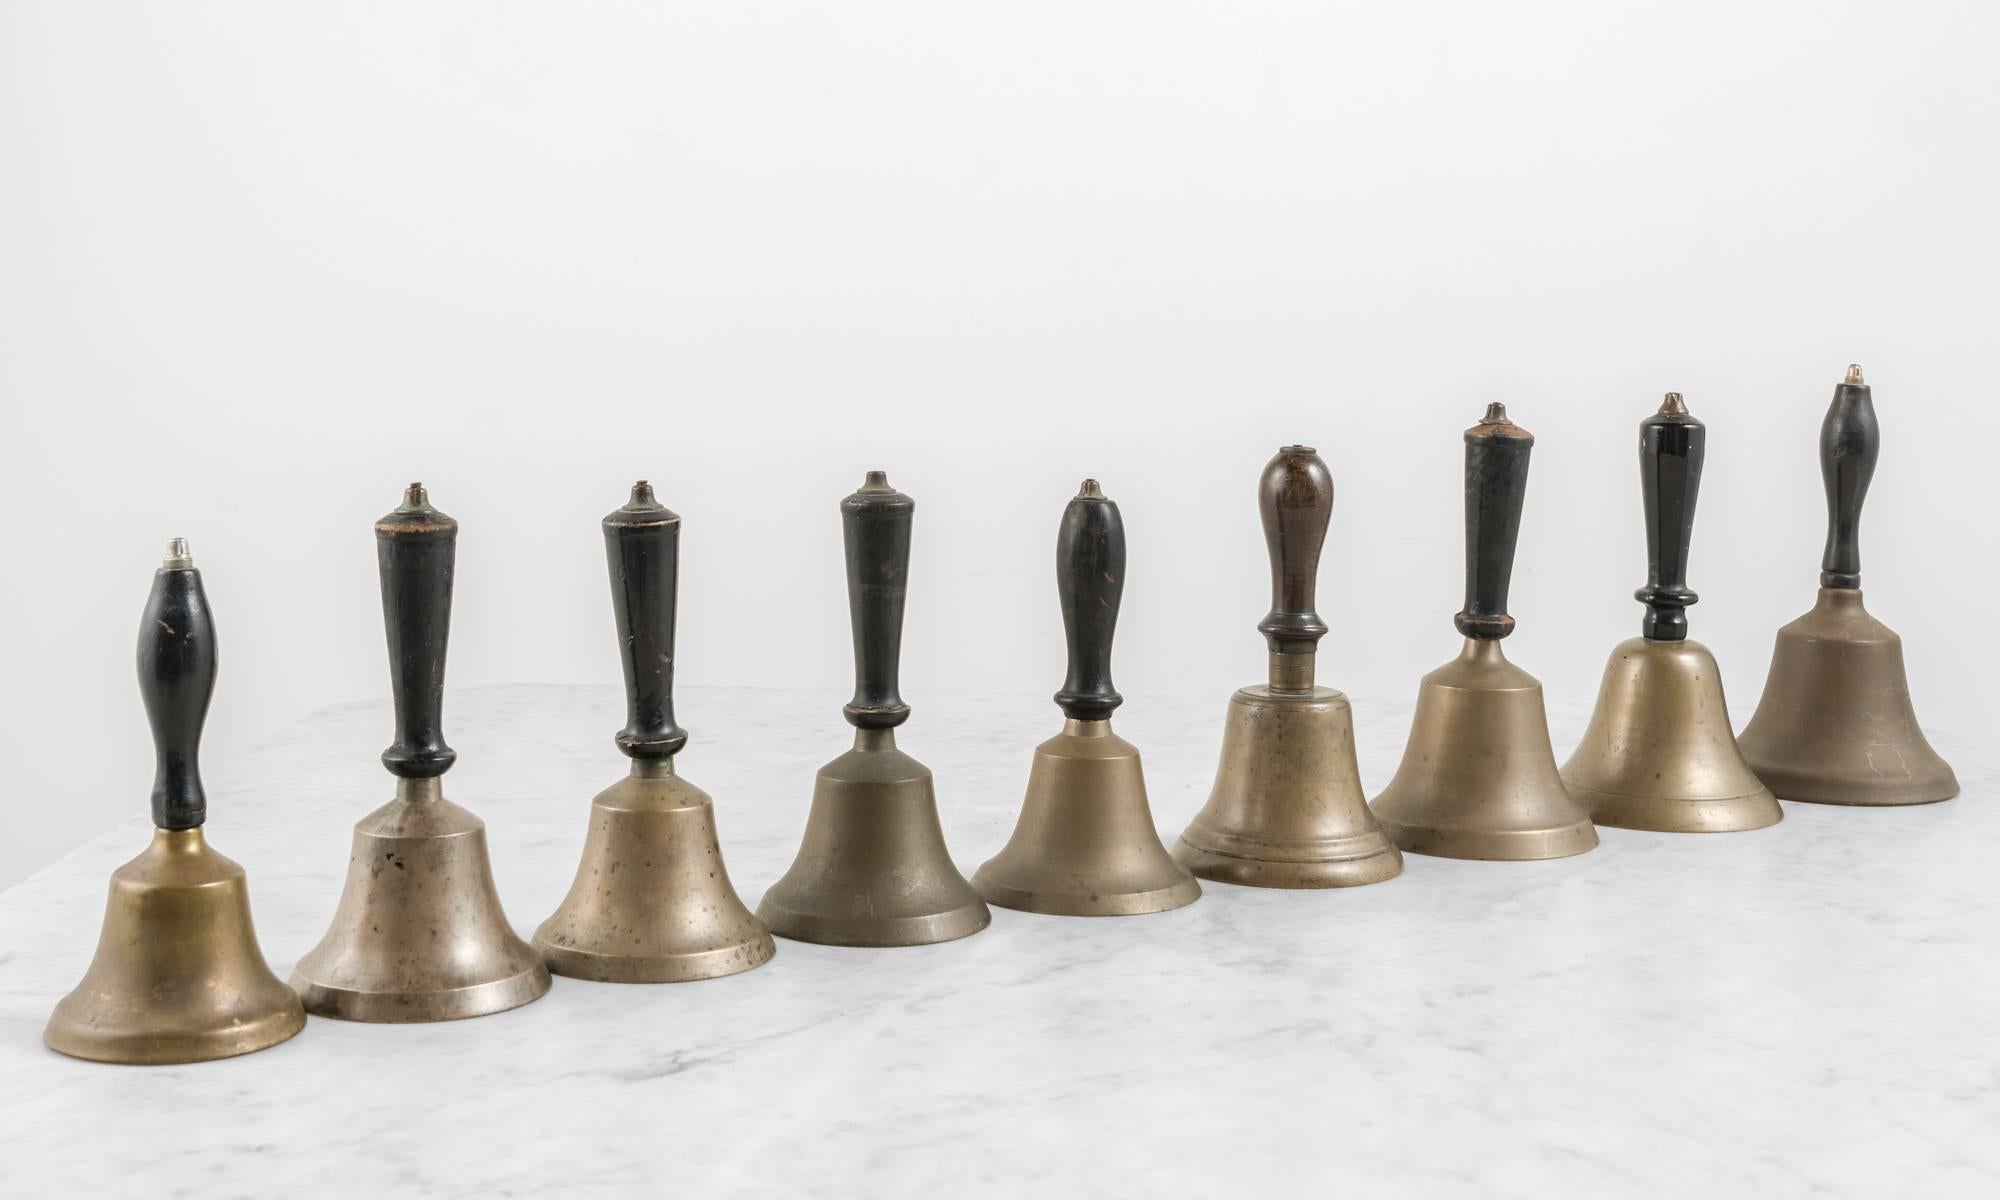 Assortment of hand bells with ebonised and turned handles.

Made in America, circa 1900-1940.